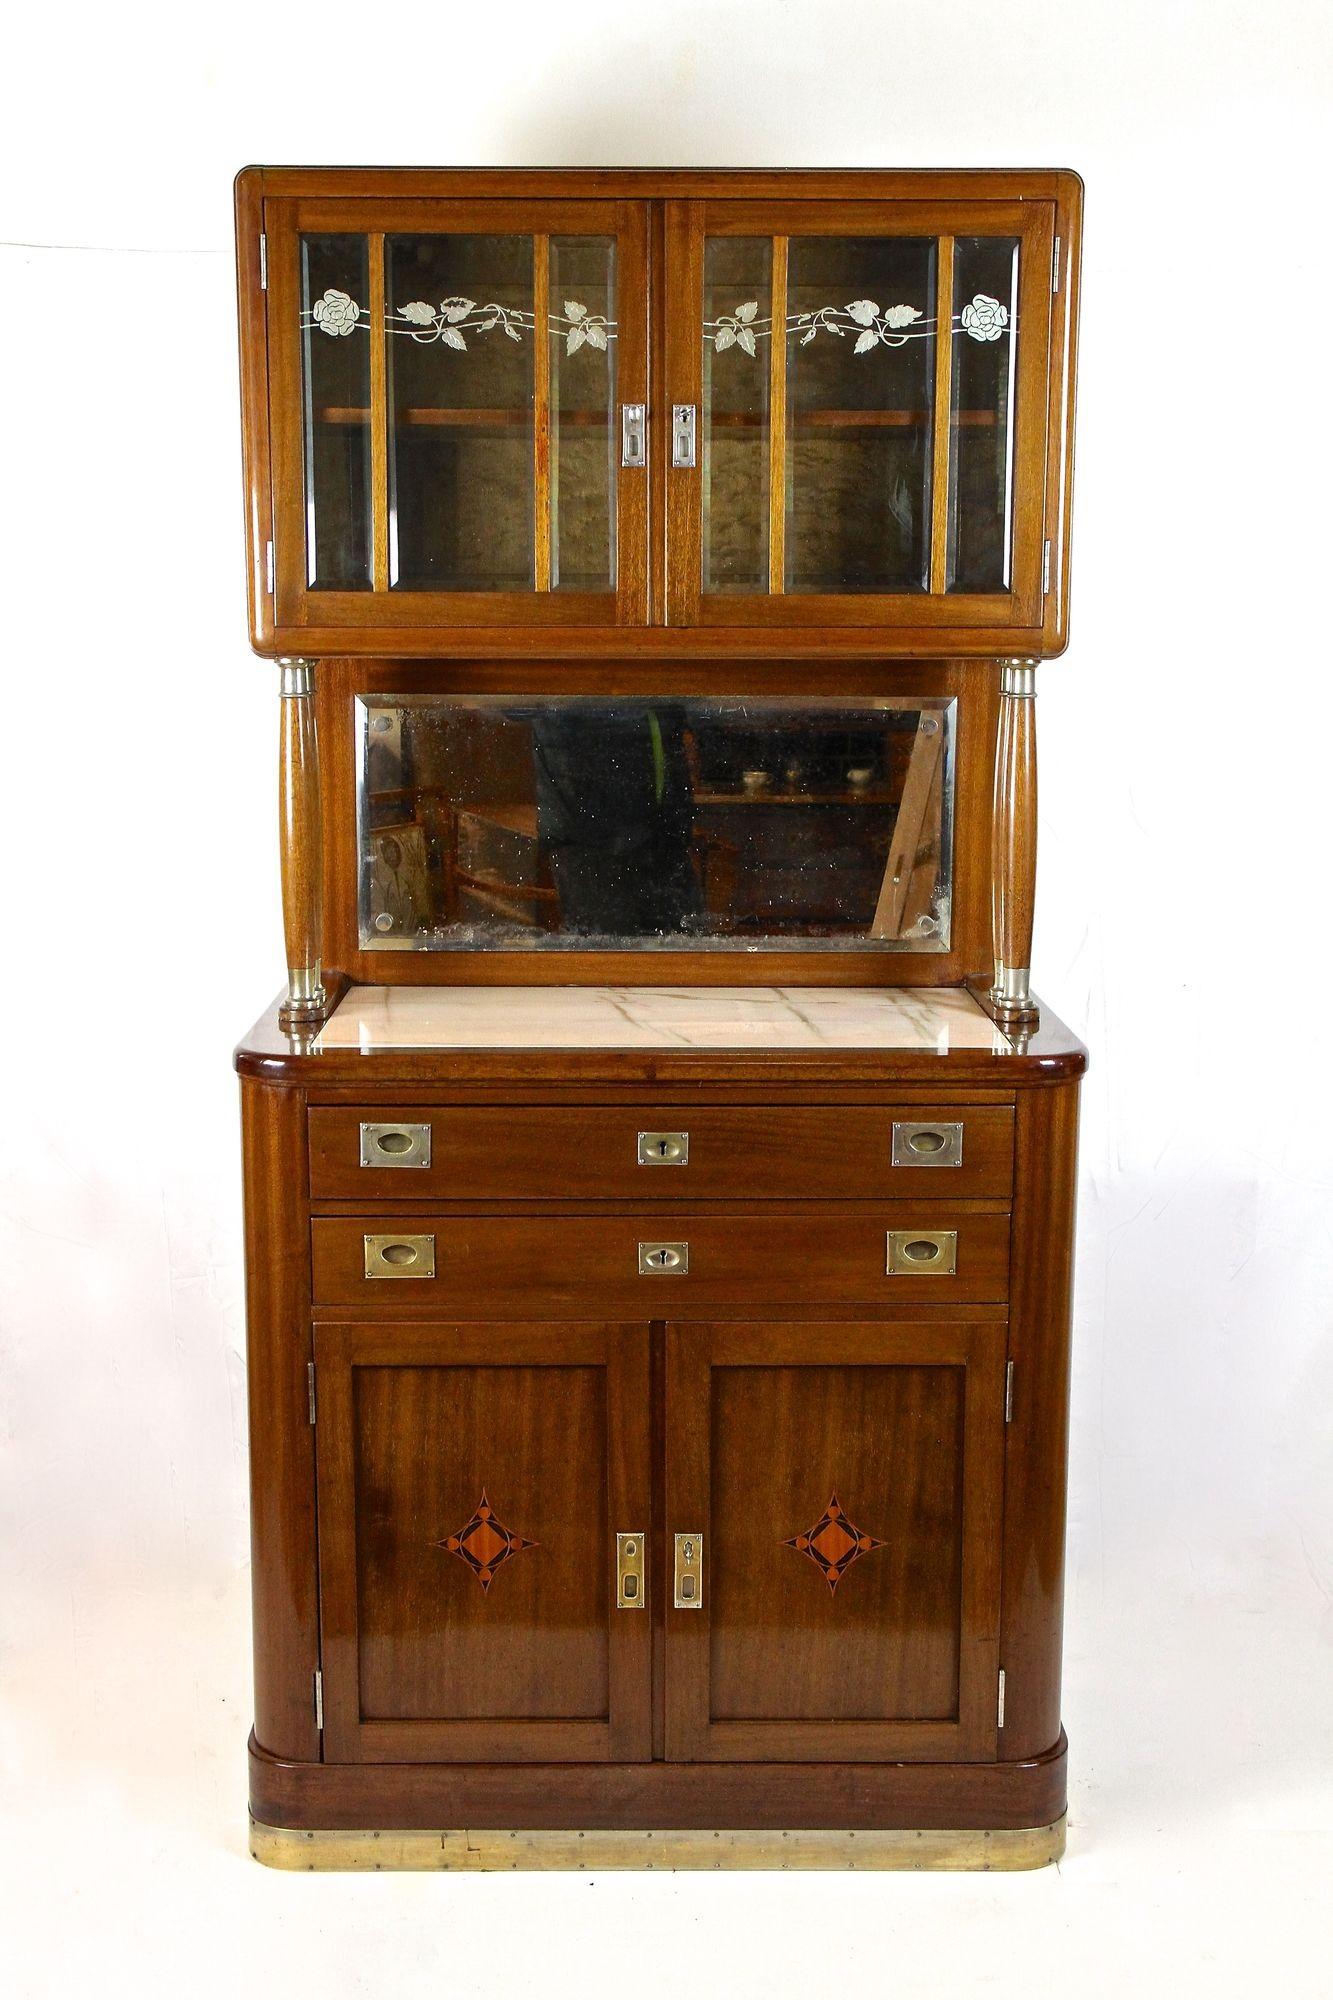 Beautiful early 20th century Art Nouveau buffet/ cabinet out of Austria made by the renowed company of Viennesse cabinetmaker Heinrich Bäck around 1910. The lower part provides two doors, both adorned by a fantastic looking inlayed patterns as well